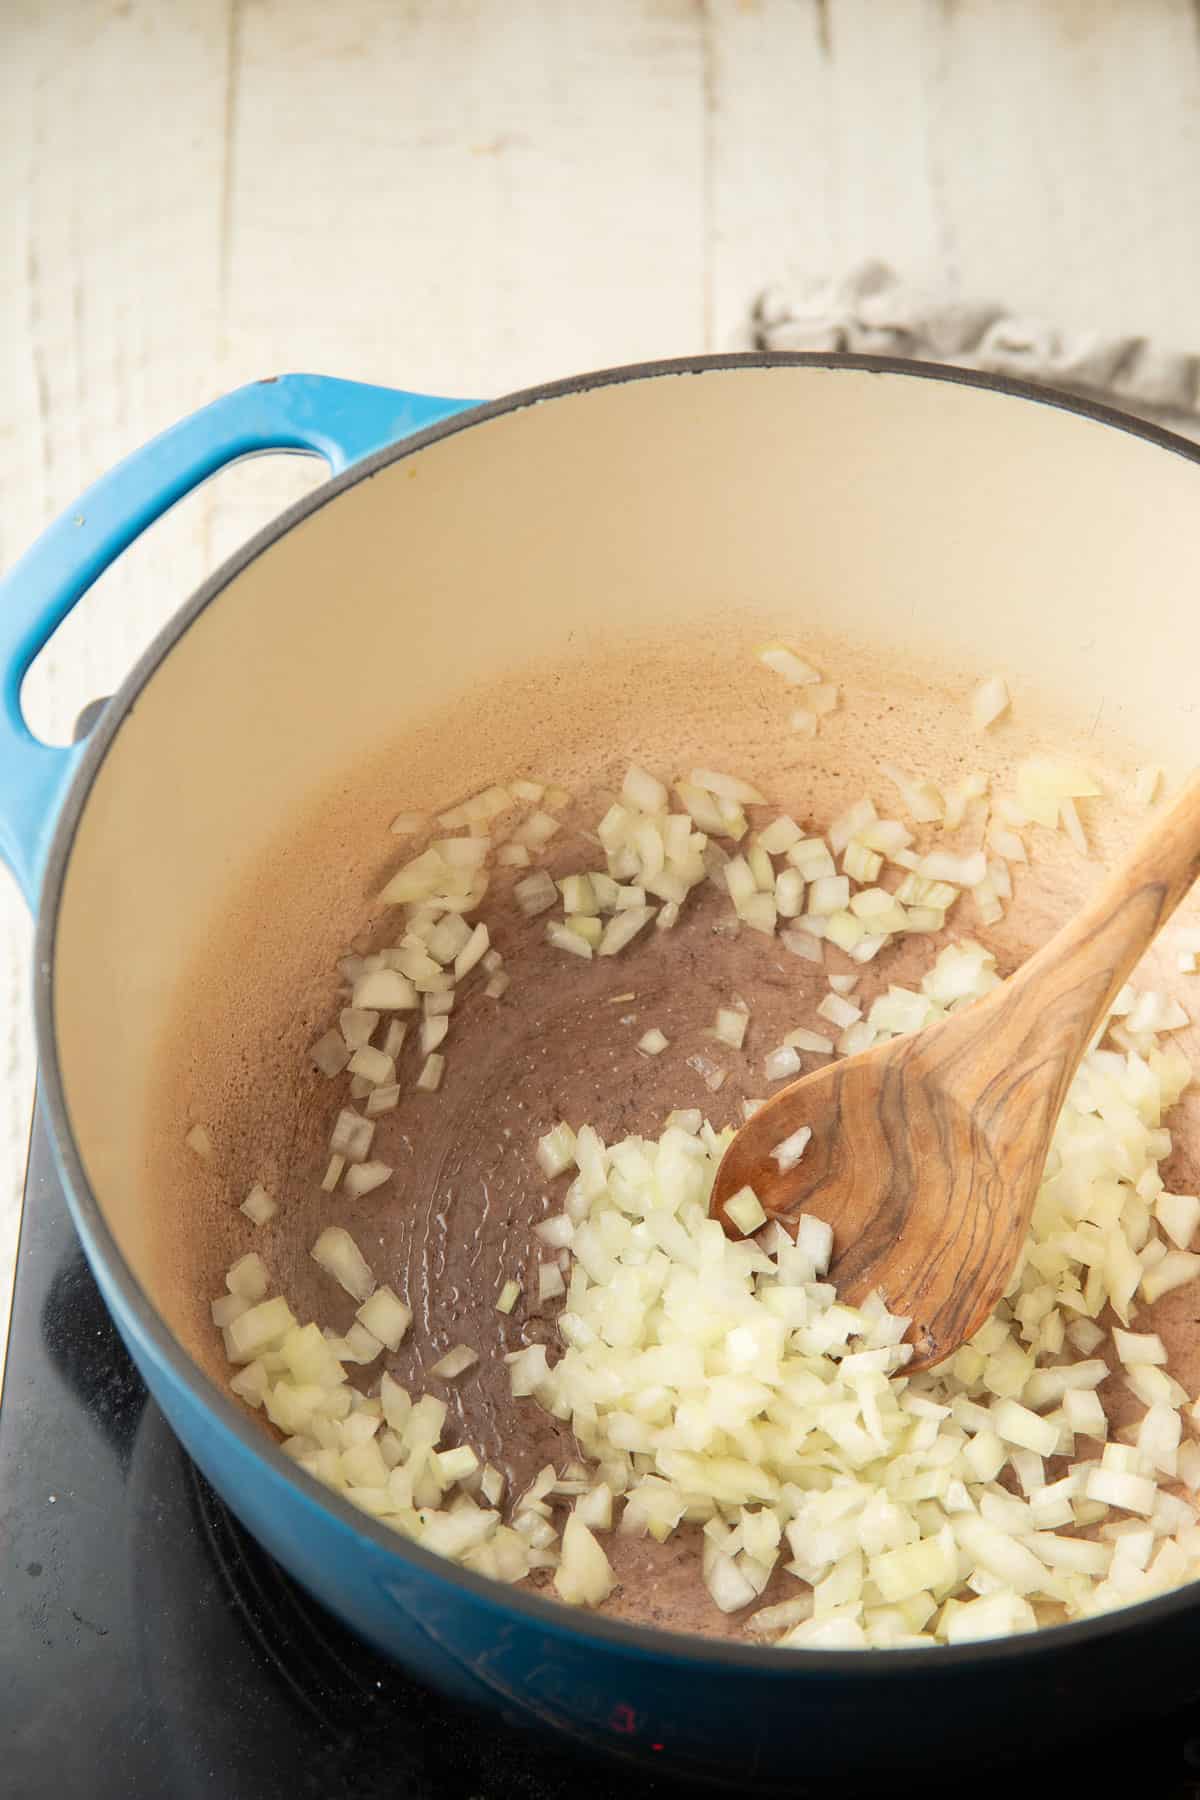 Diced onion cooking in a pot with spoon.